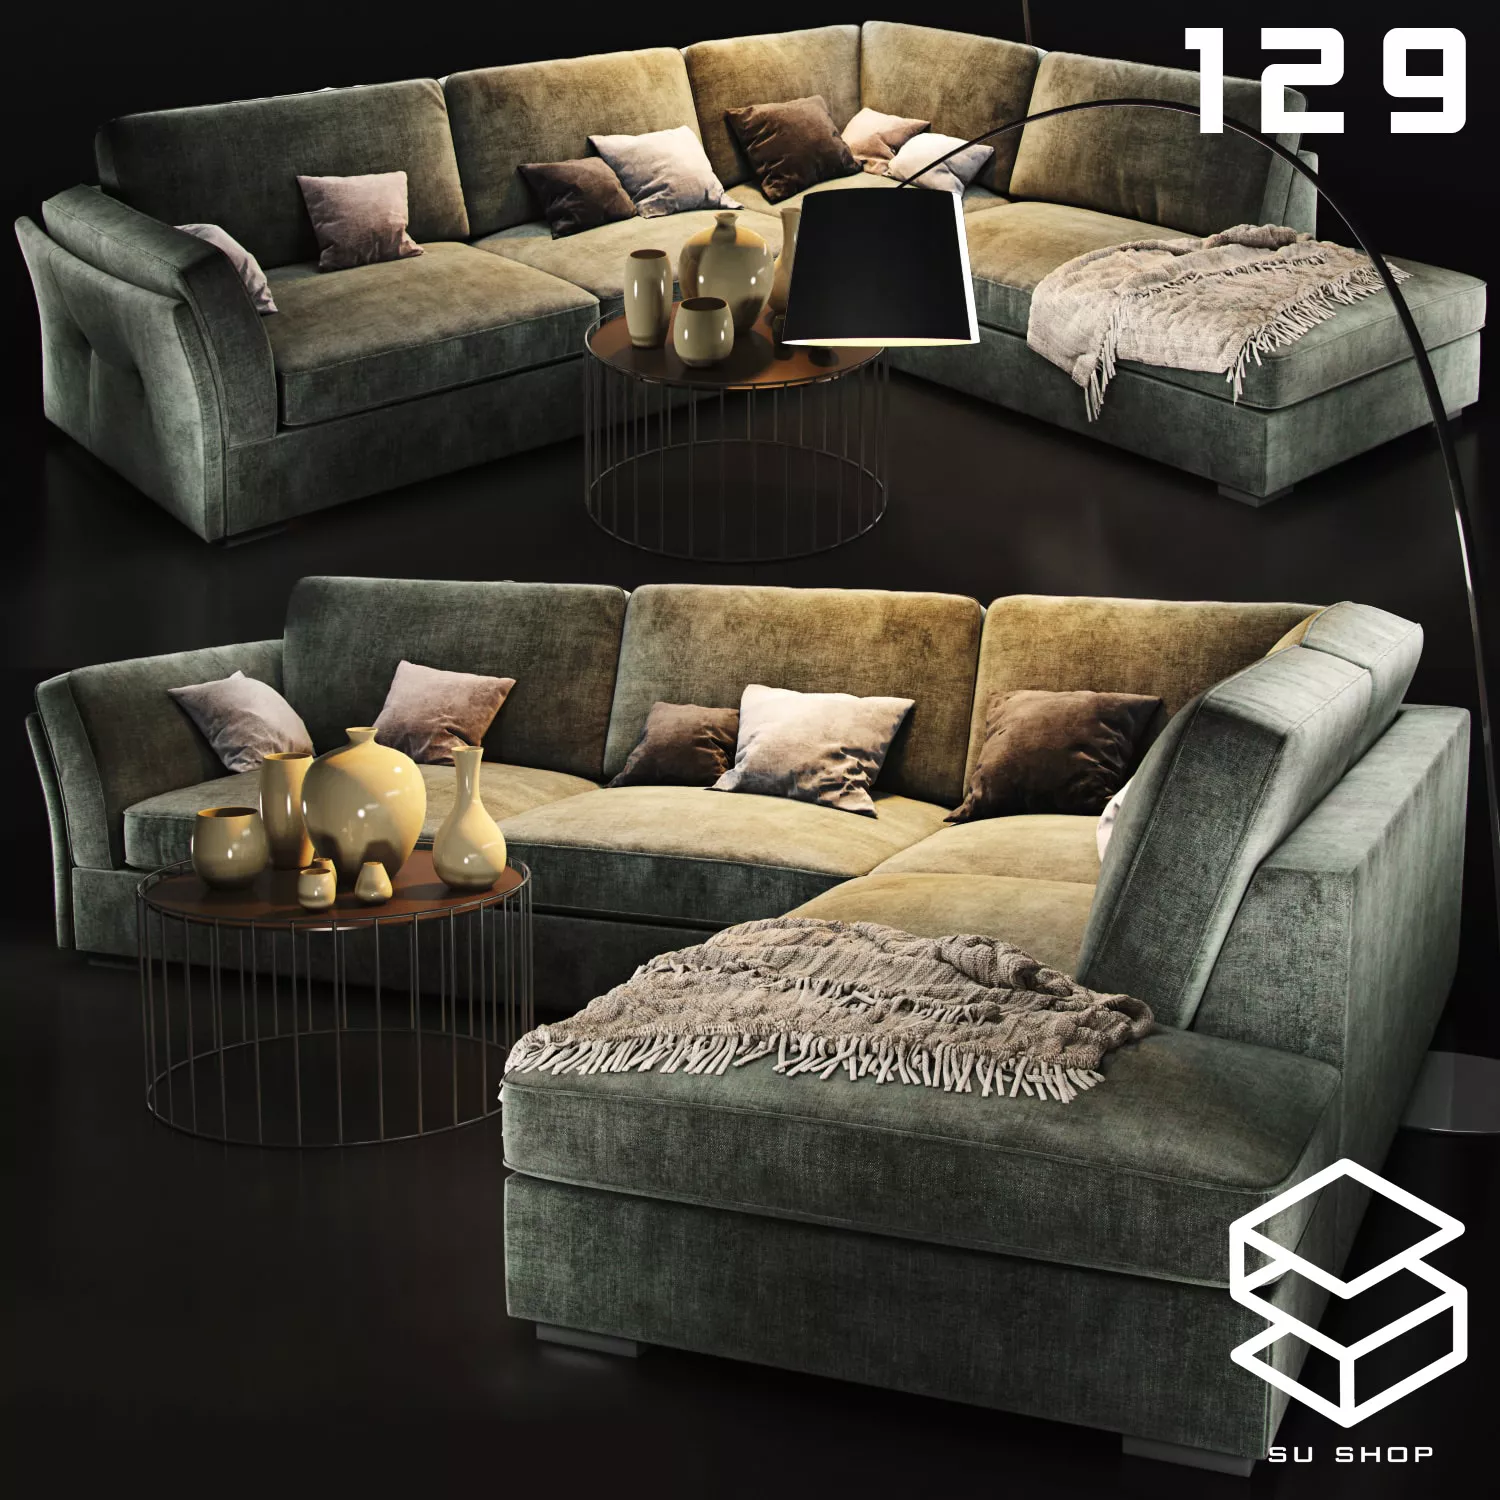 MODERN SOFA - SKETCHUP 3D MODEL - VRAY OR ENSCAPE - ID13418